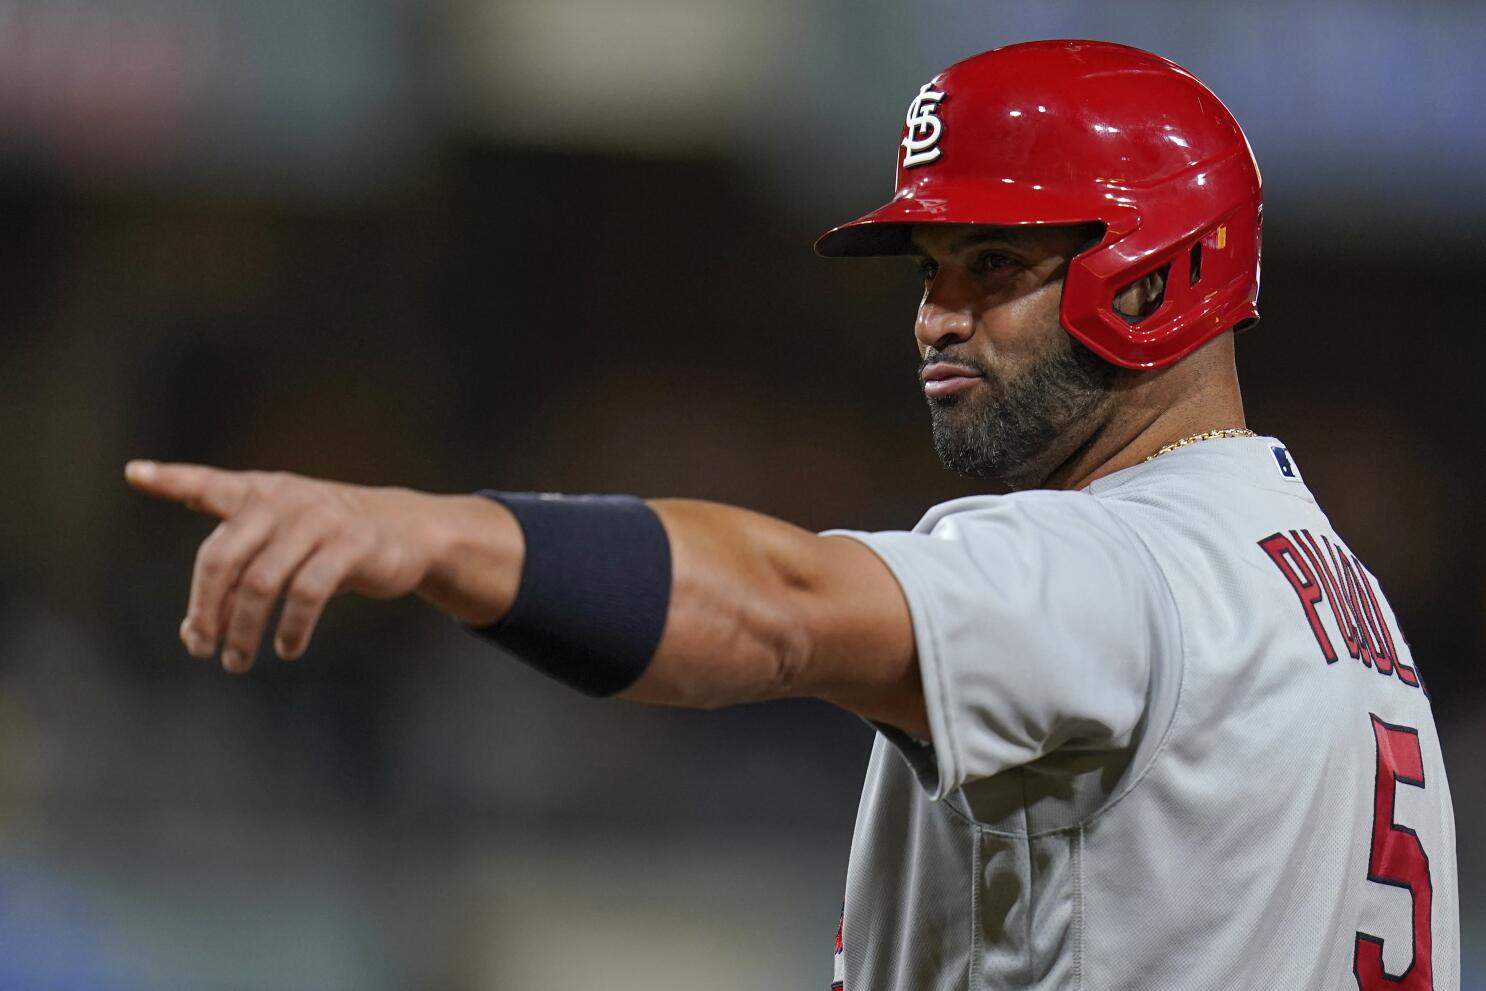 Could Albert Pujols Get to 700 Home Runs? - The New York Times